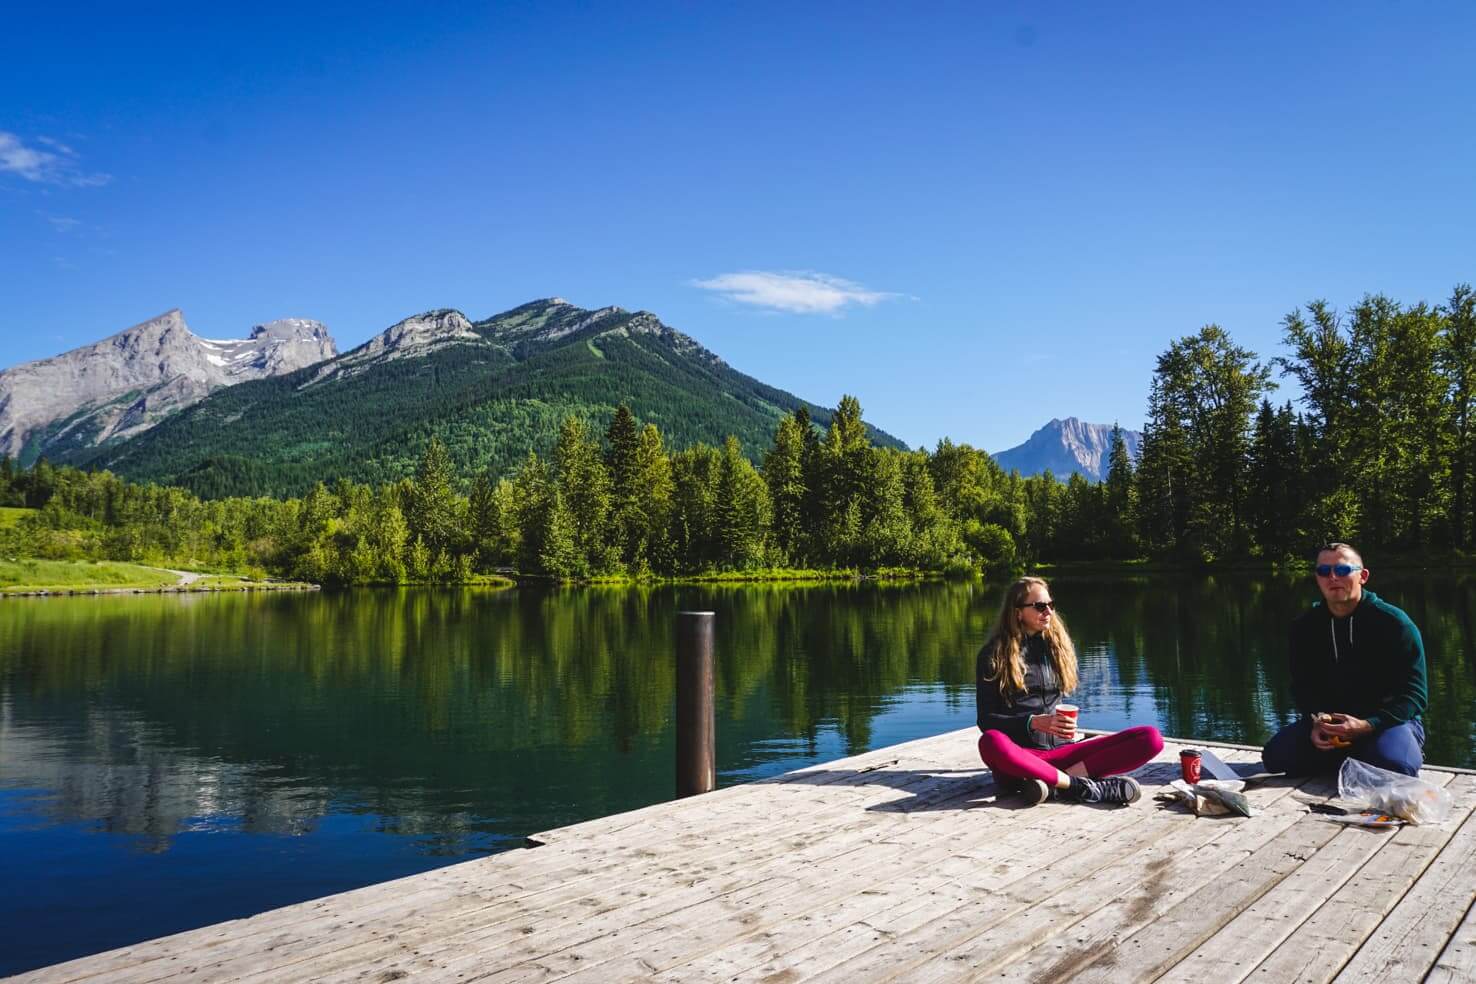 Things to do in Fernie, BC - 23 Have a morning picnic at Maiden Lake